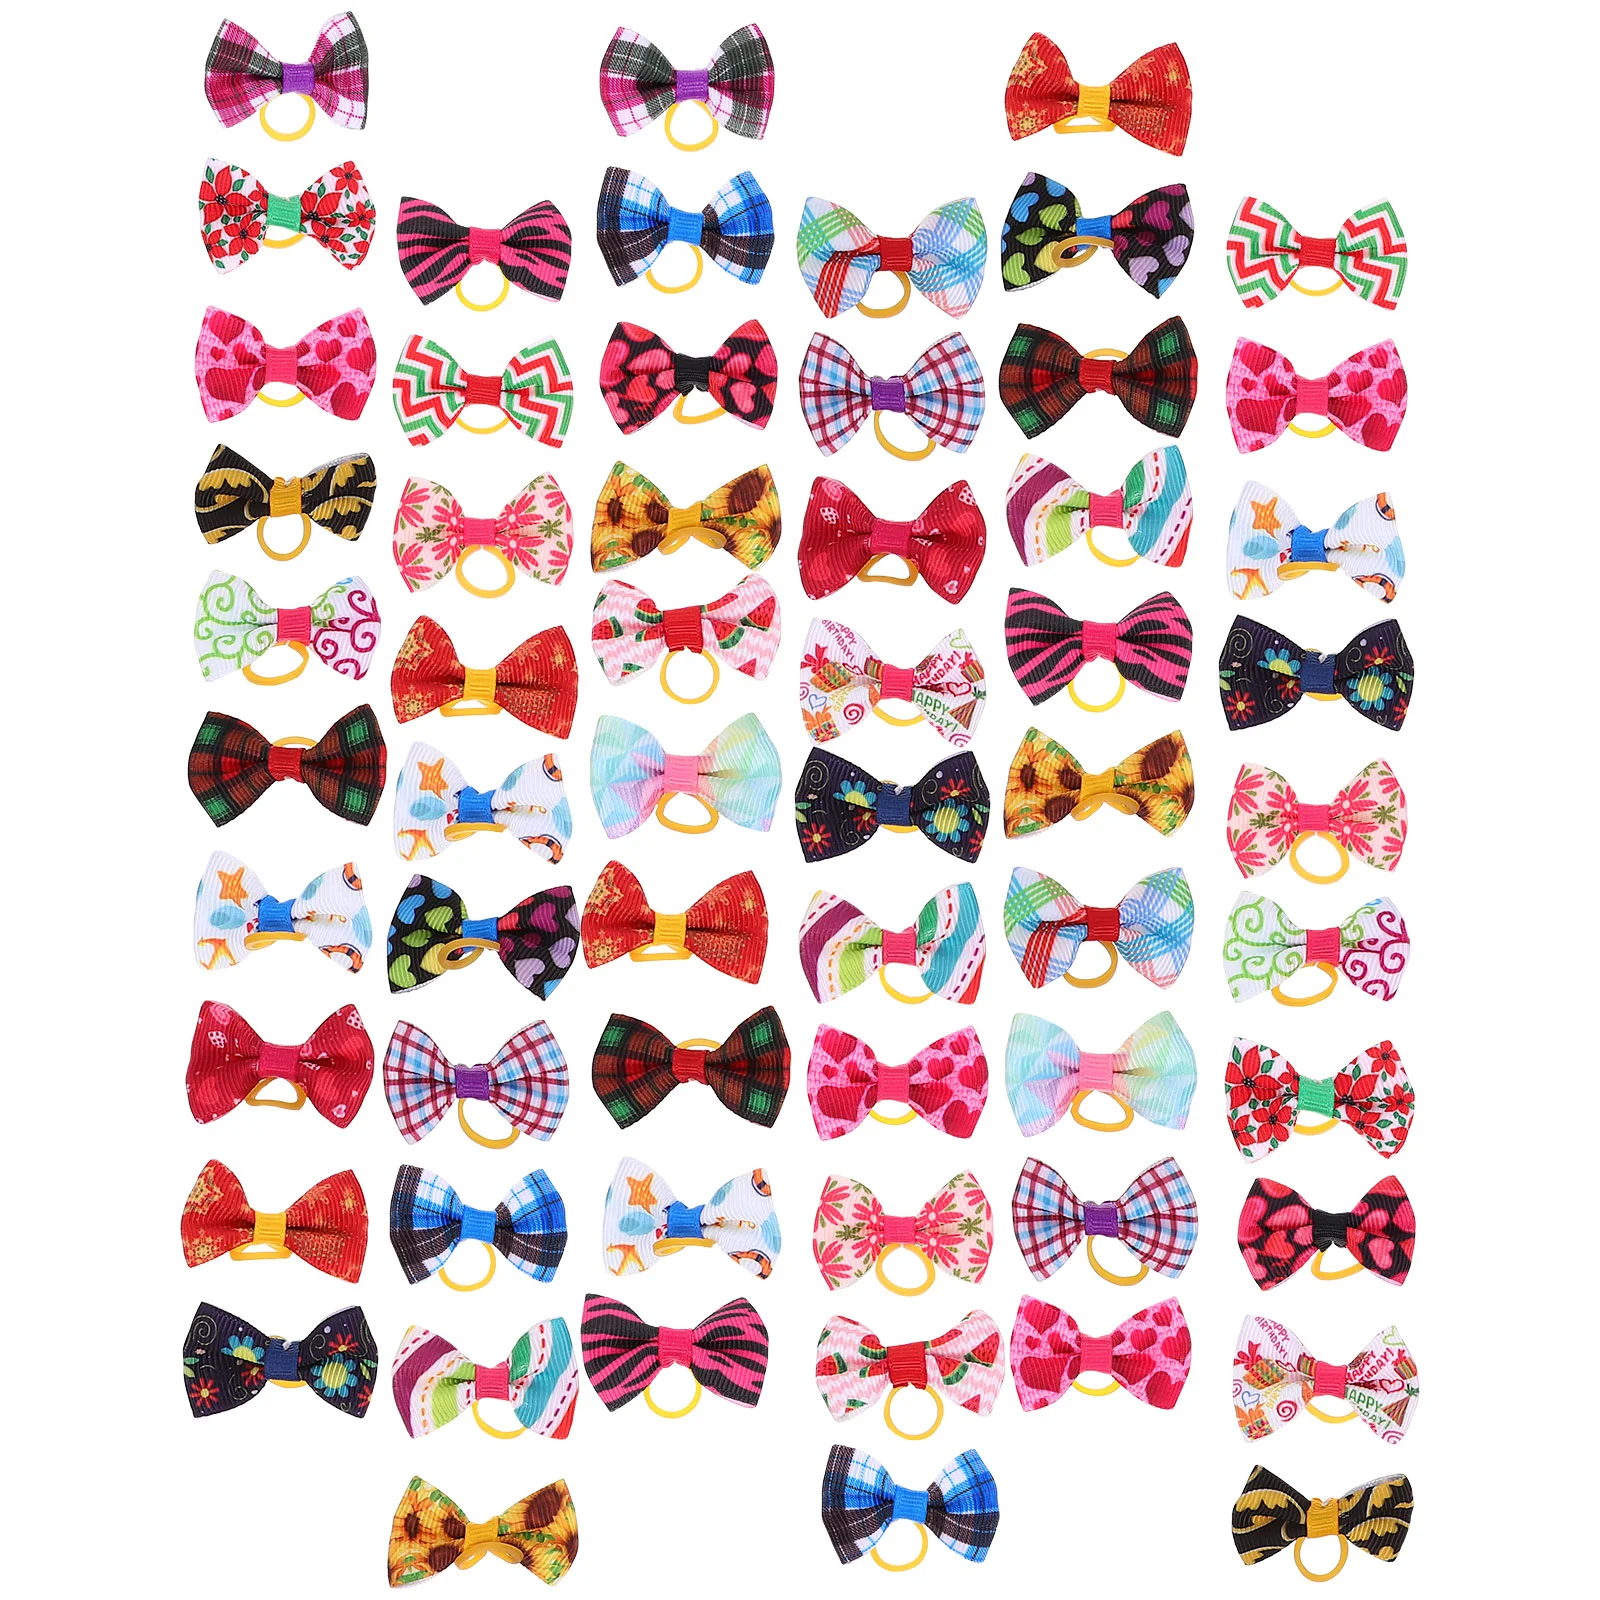 

60 Pcs Pet Head Flower Cat Hair Bows Dog Tie Party Puppy Bands Decorative for Kitten